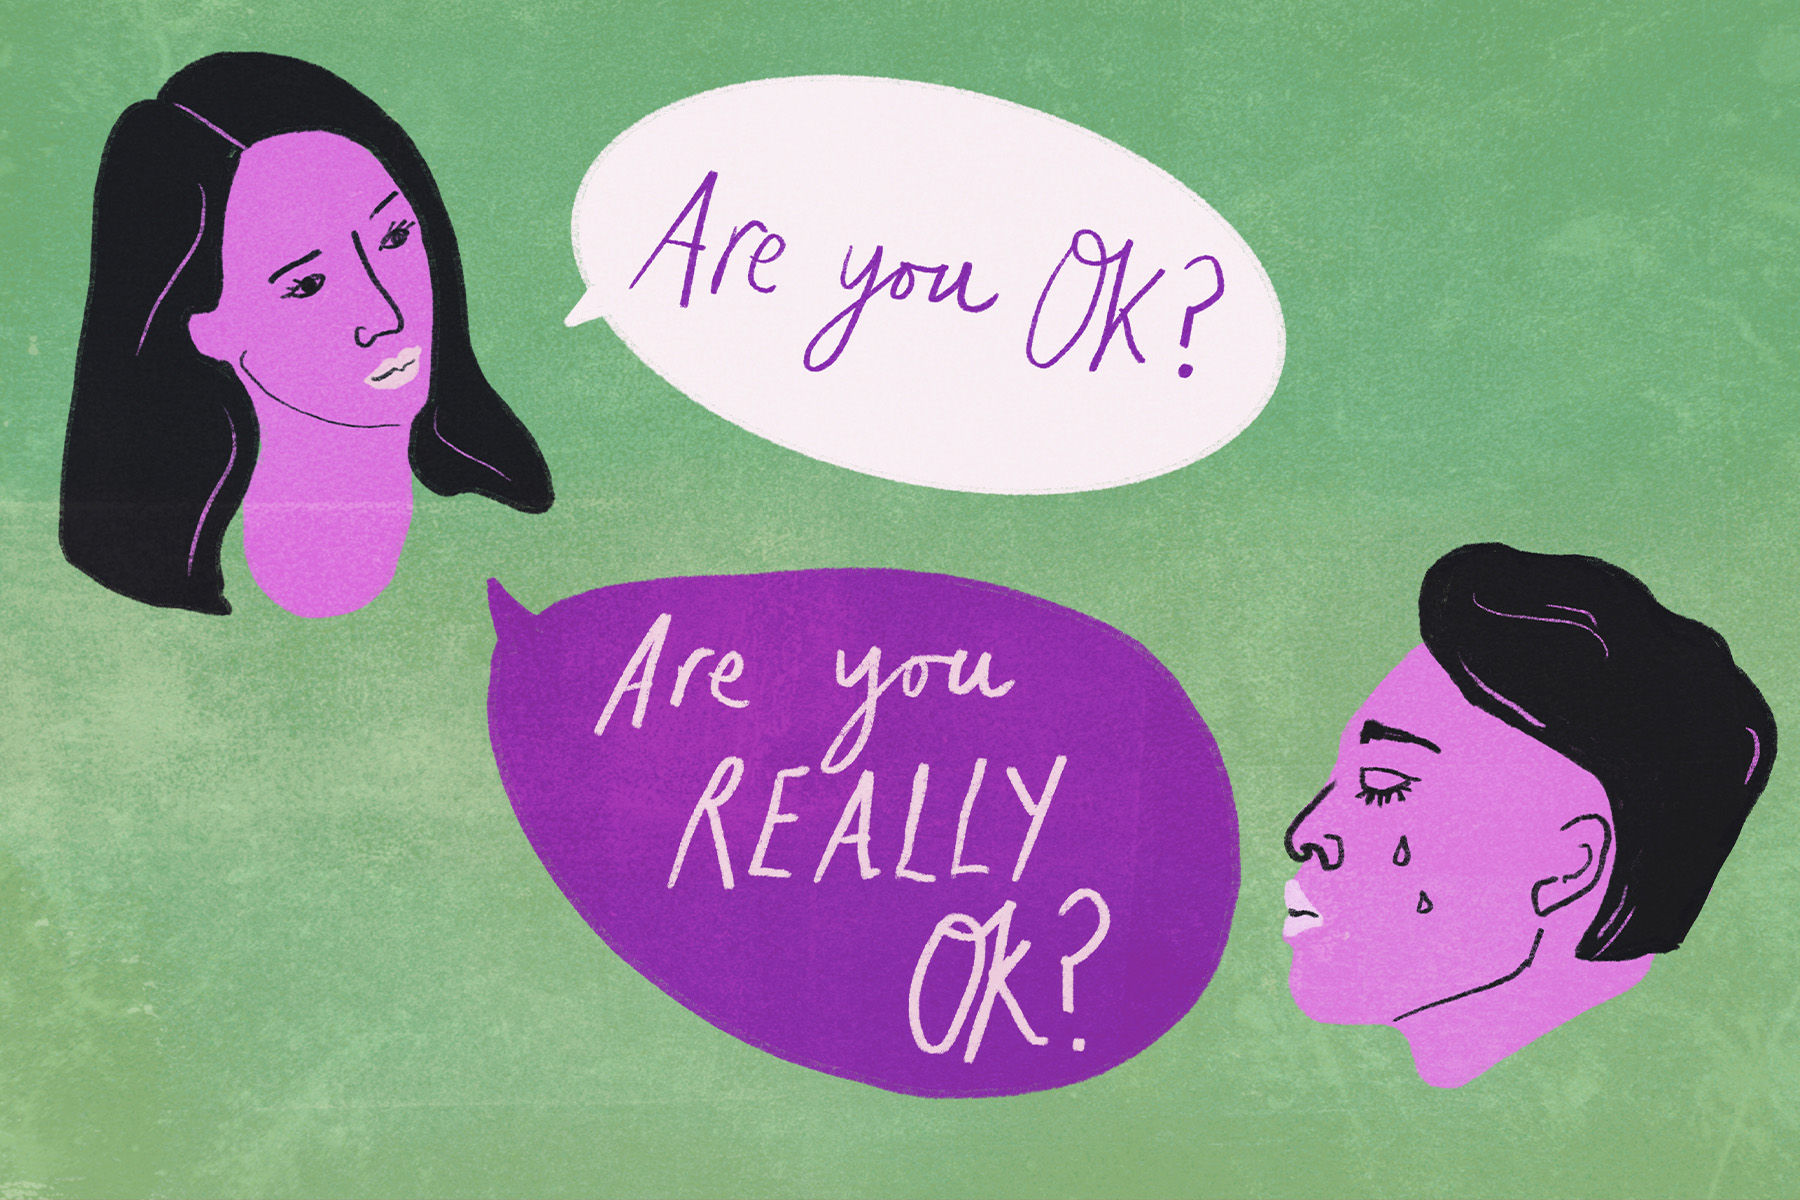 An illustration of a woman's head on the left asking a man's head on the right, "Are you ok?" and then, again, "Are you really ok?"